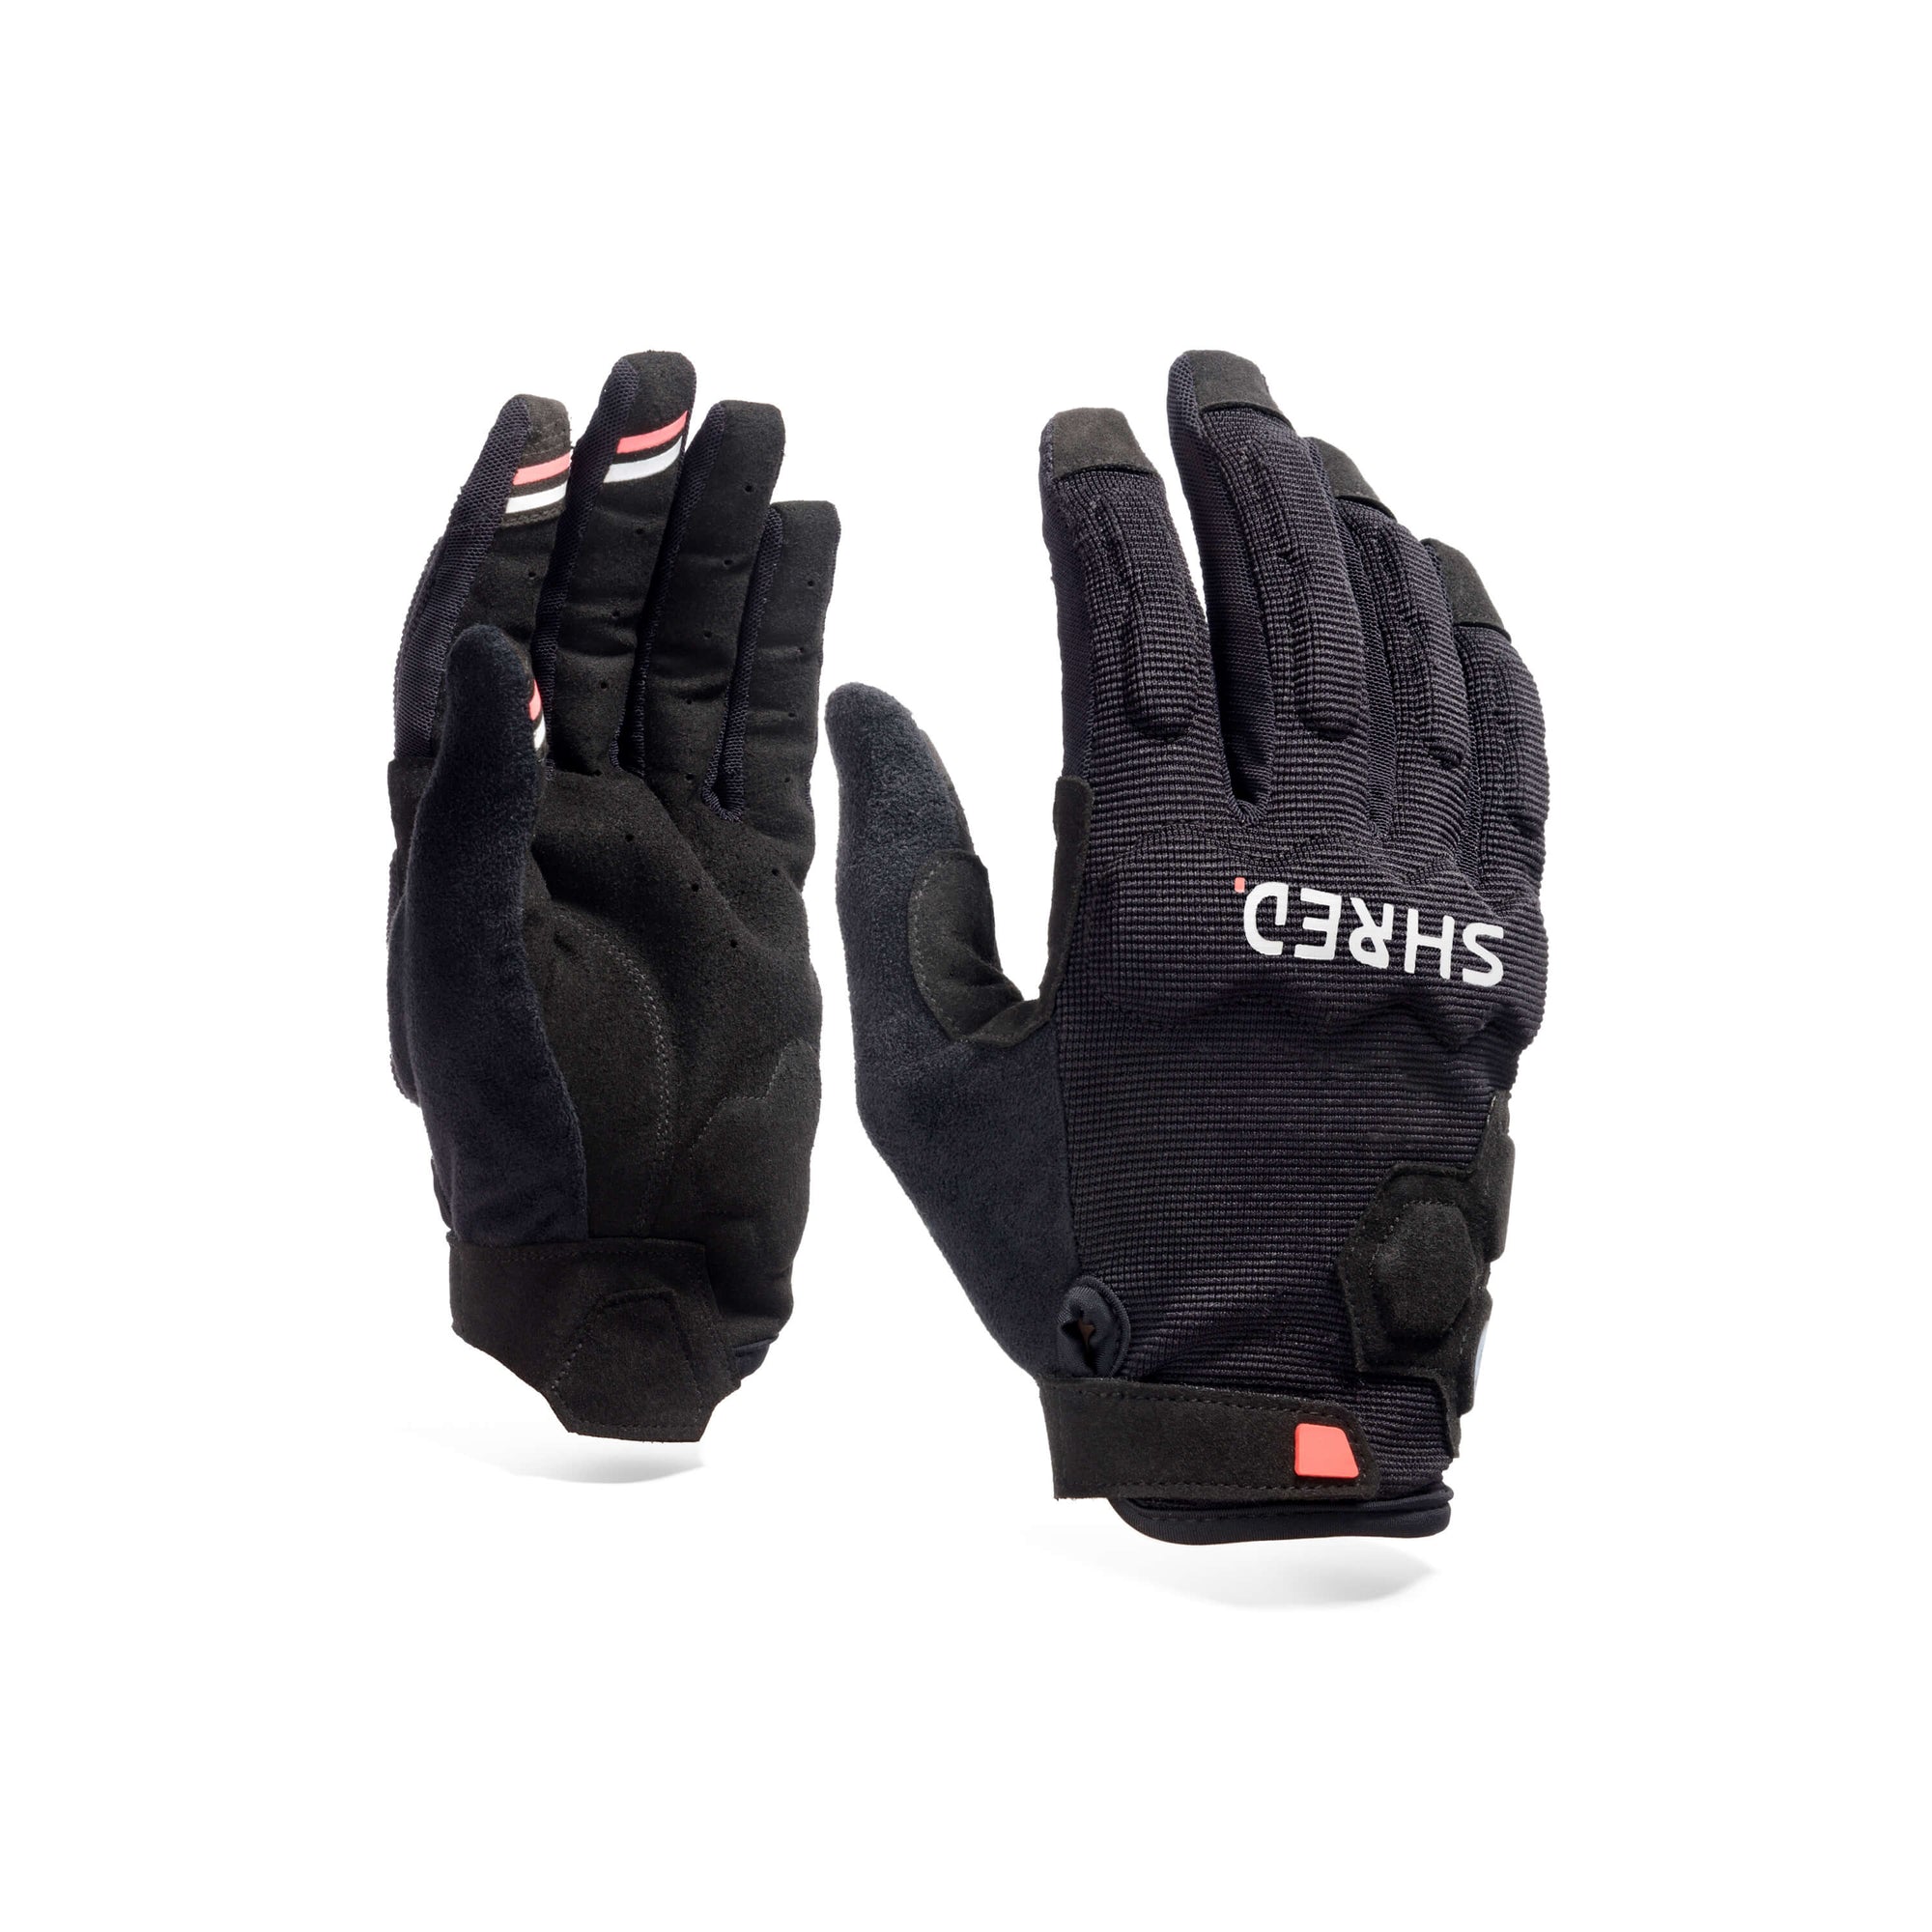 Mtb Protective Gloves Trail - Protective Gloves|BPBGTL11L,BPBGTL11M,BPBGTL11S,BPBGTL11XL,BPBGTL11XS